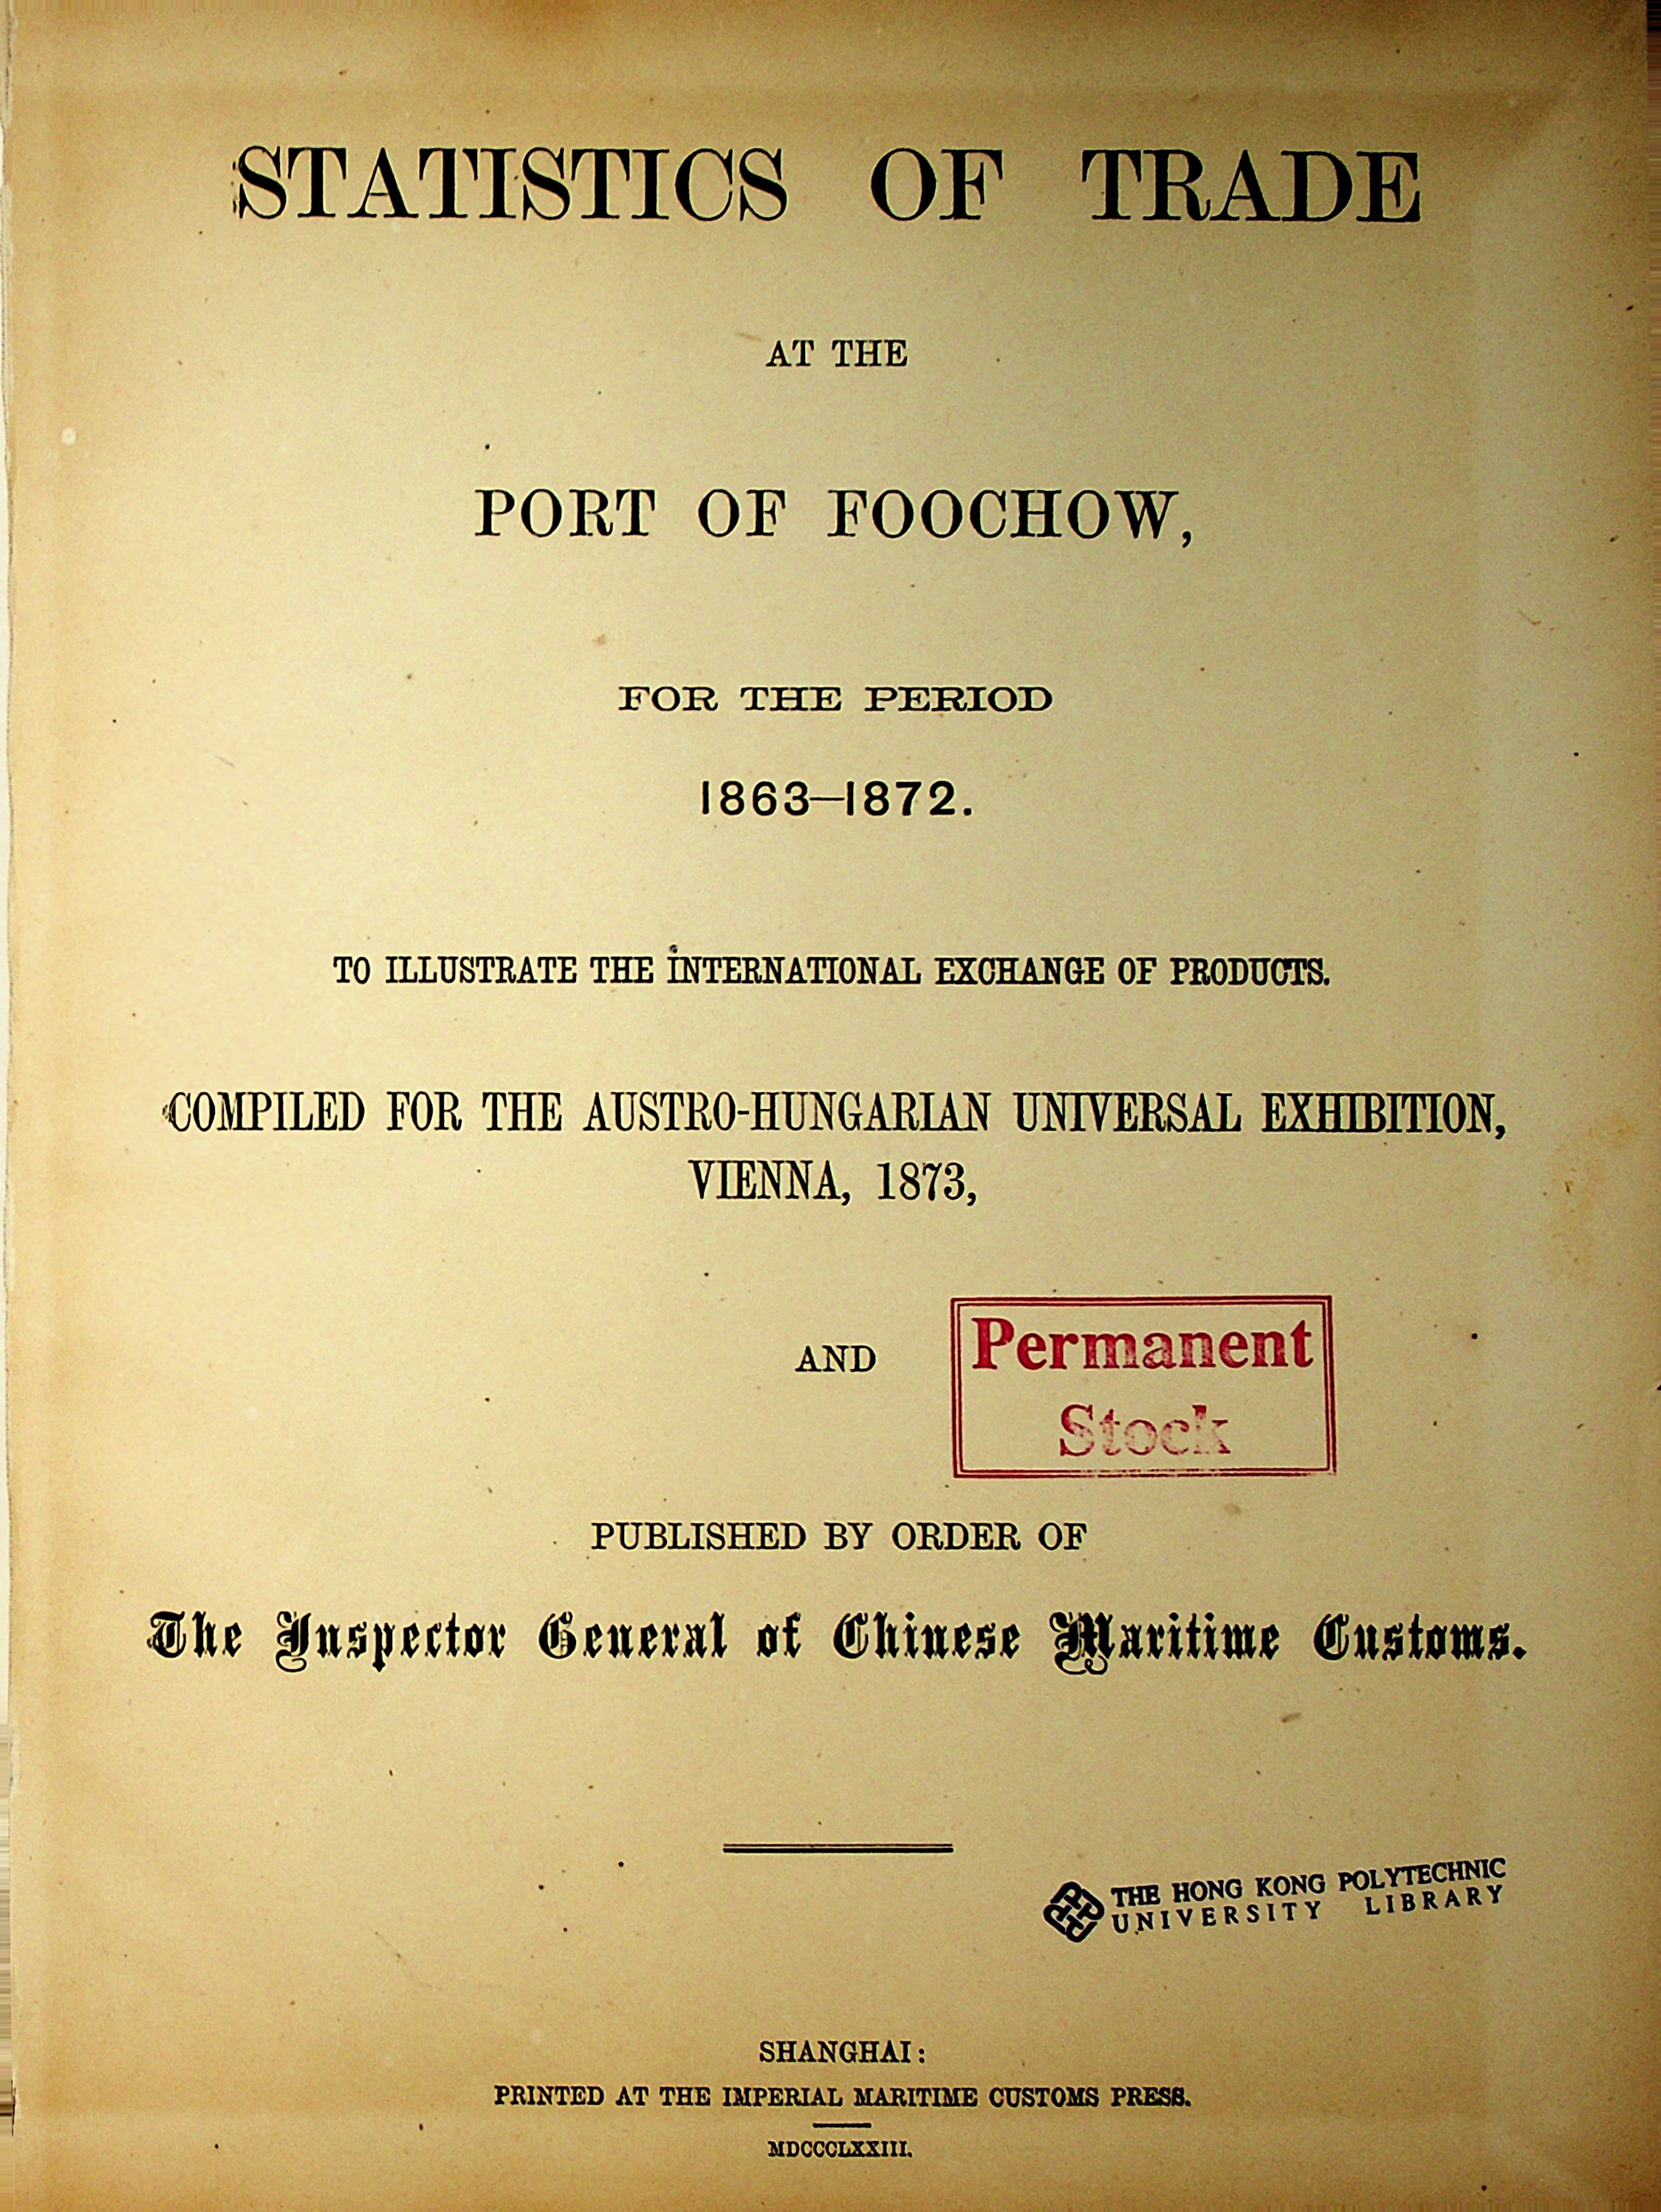 Statistics of trade at the port of Foochow, for the period 1863-1872